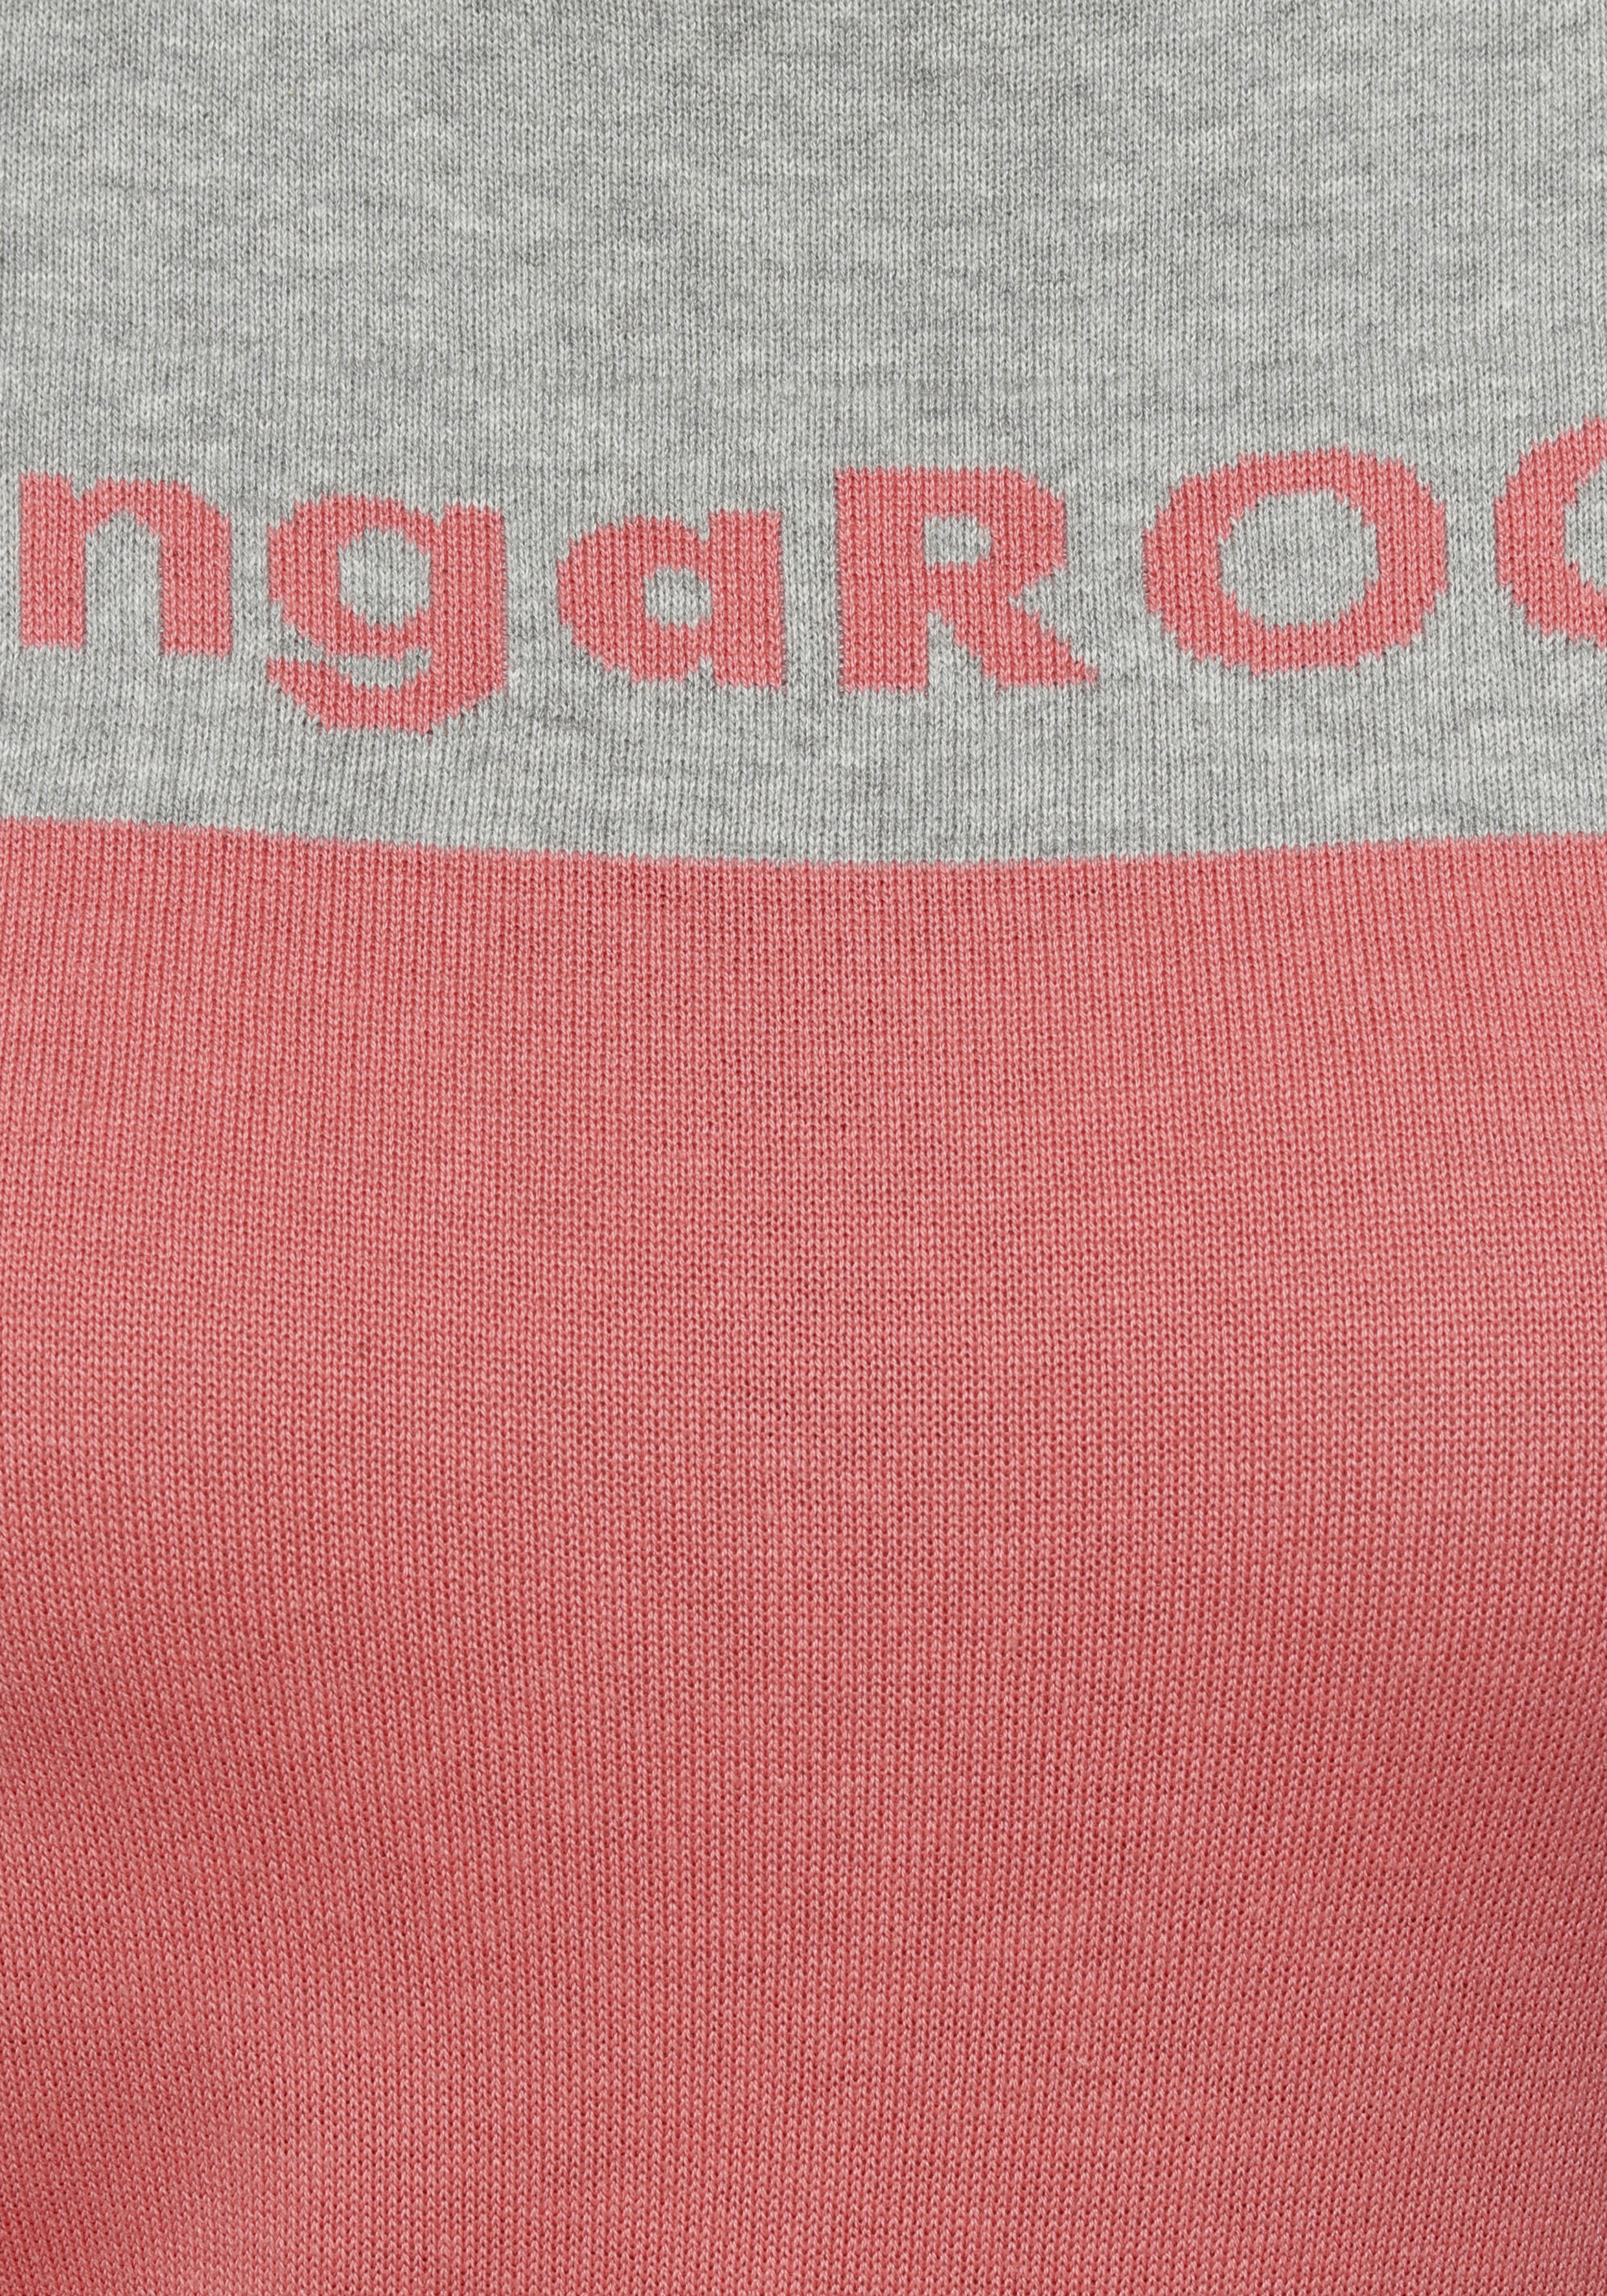 KangaROOS Pullover in Lachs 